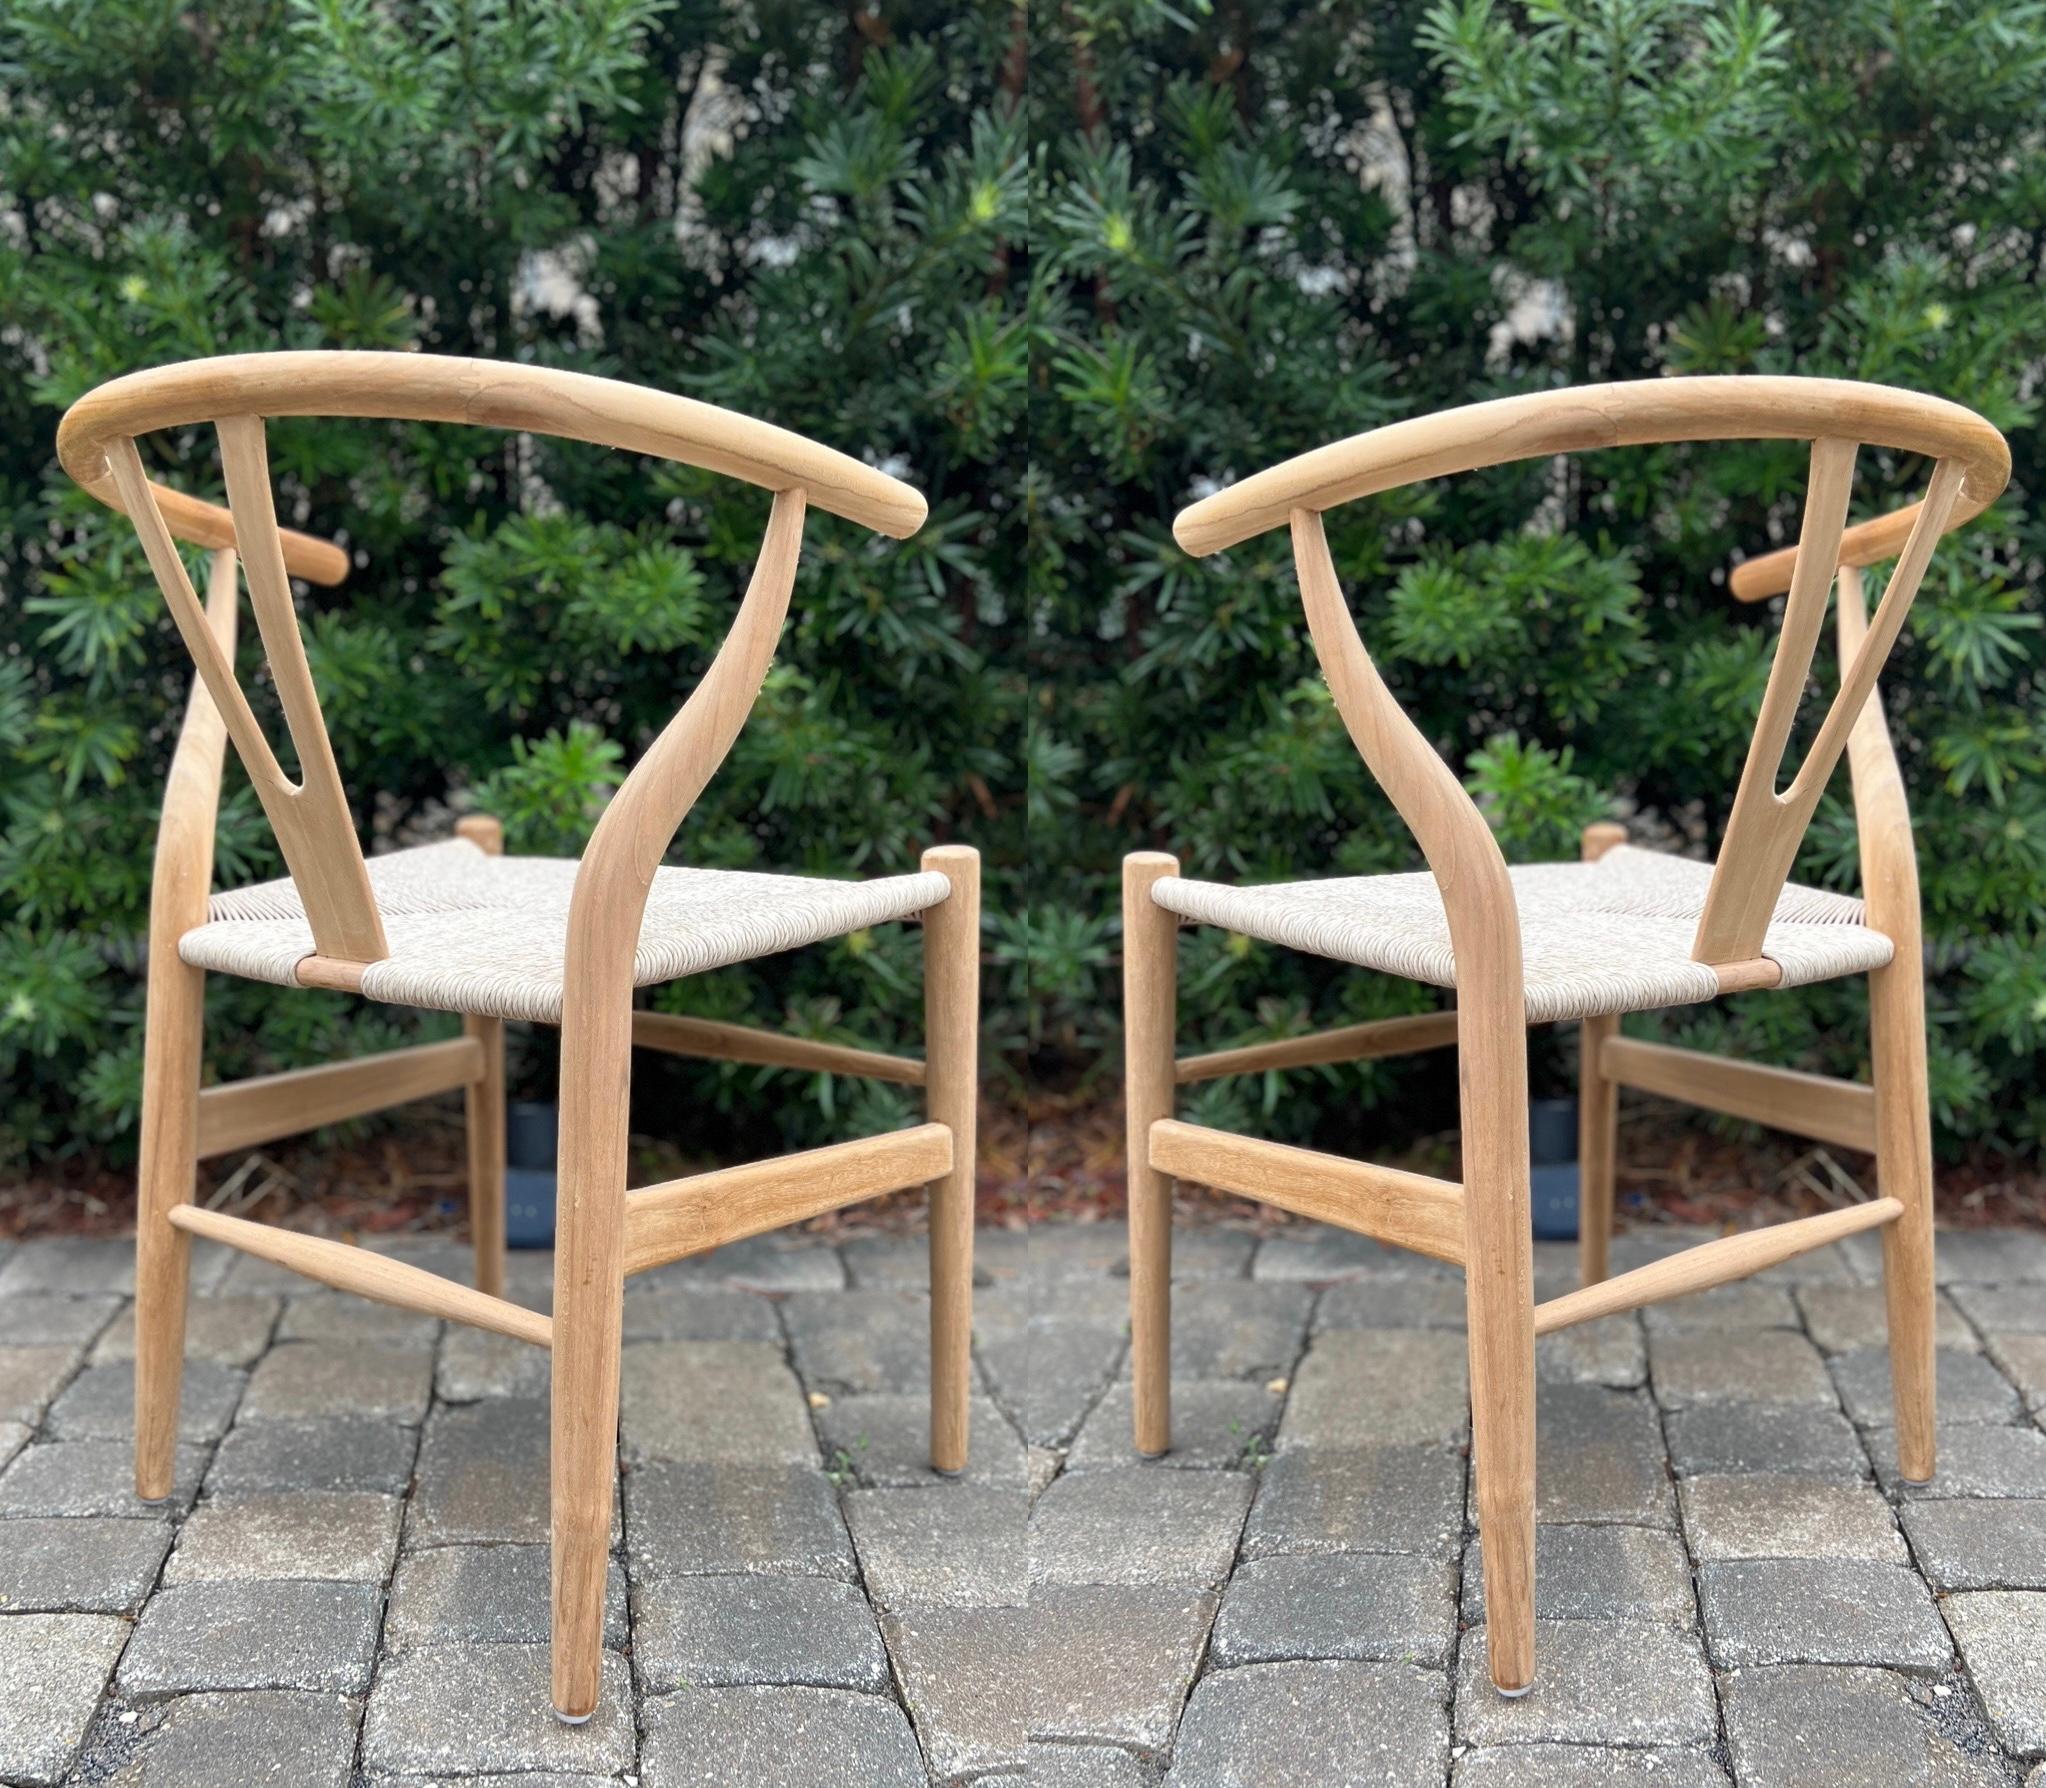 Dutch Pair of Mid-Century Modern Chairs in Natural Teak Wood with Woven Seats, Denmark